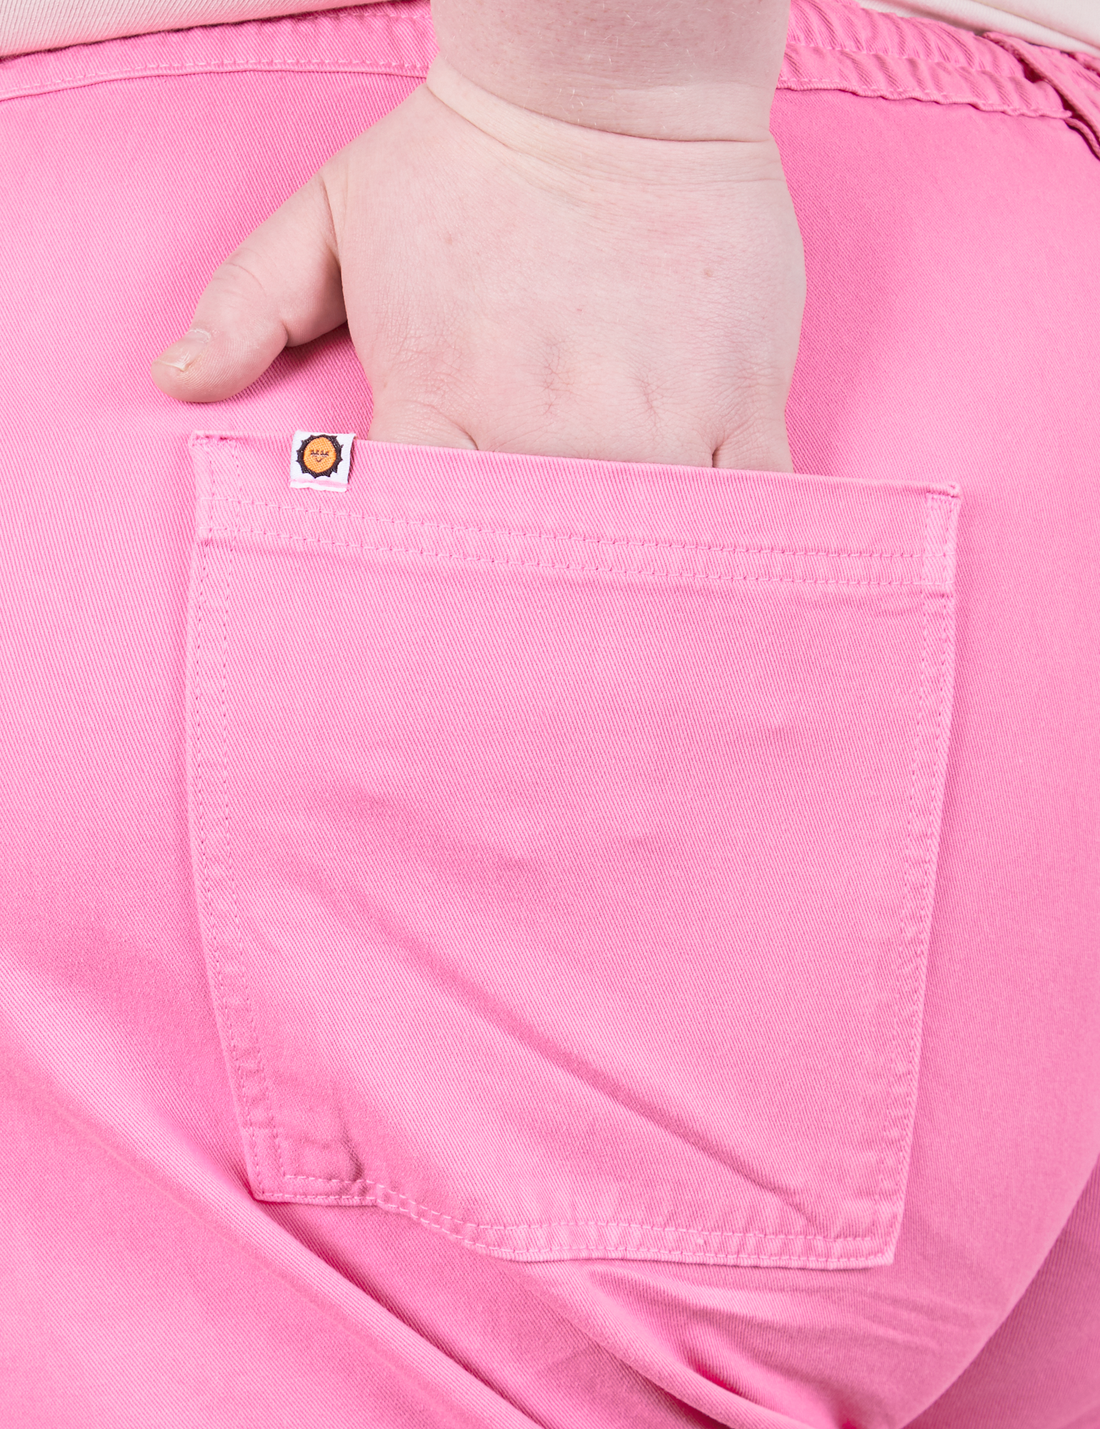 Western Pants in Bubblegum Pink back pocket close up. Worn by Catie with hand in pocket